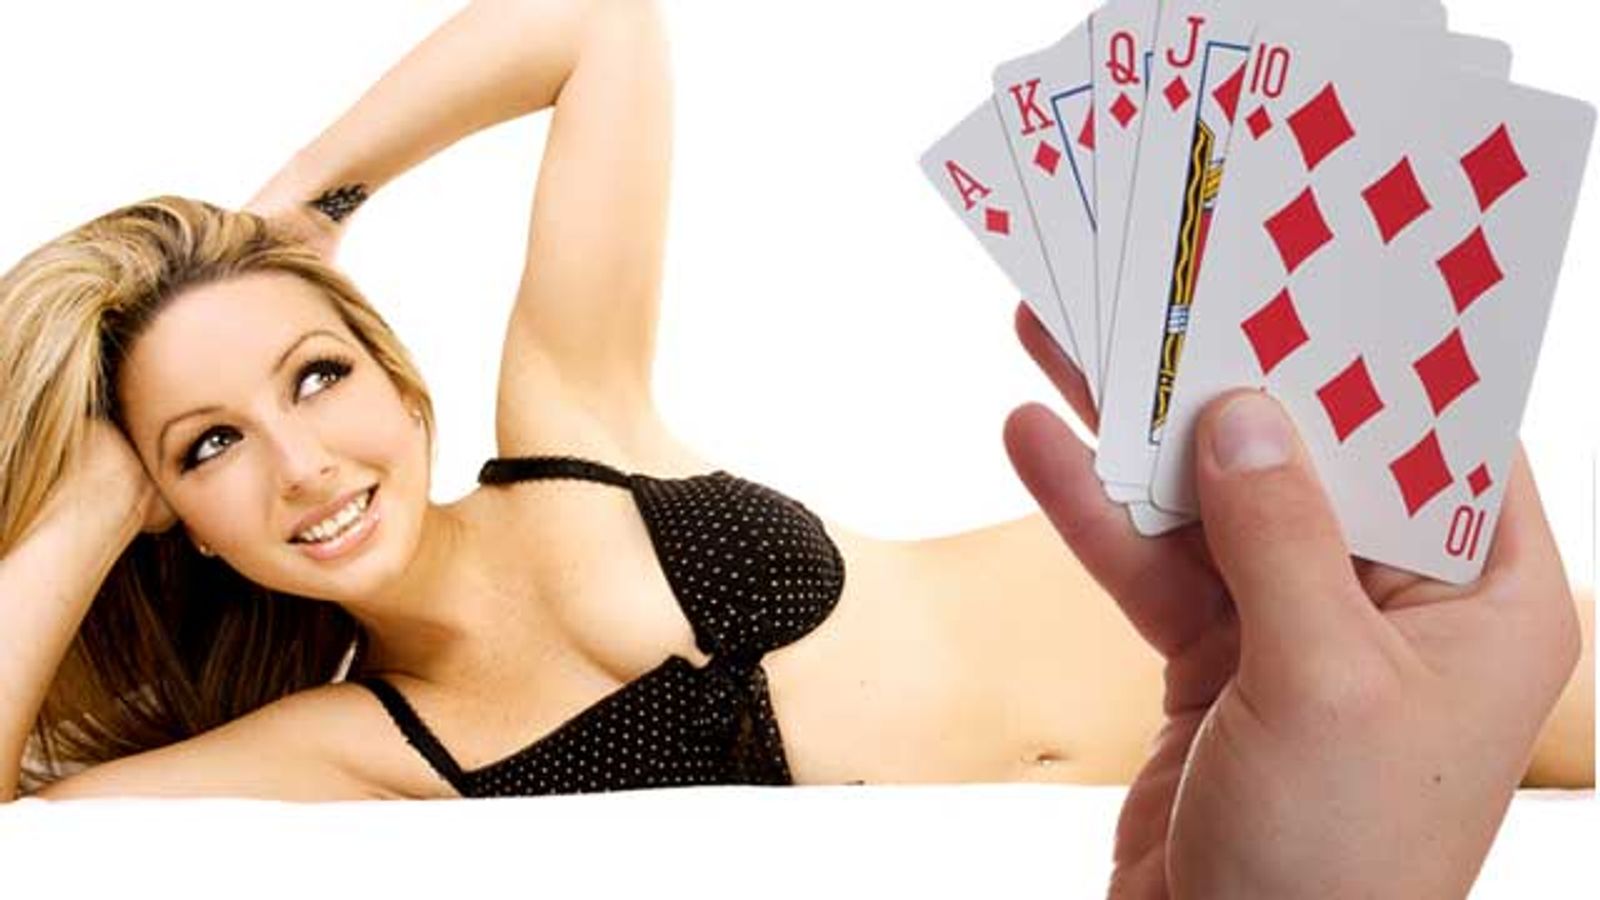 Poker Affiliate Offers Porn Access in VIP Section